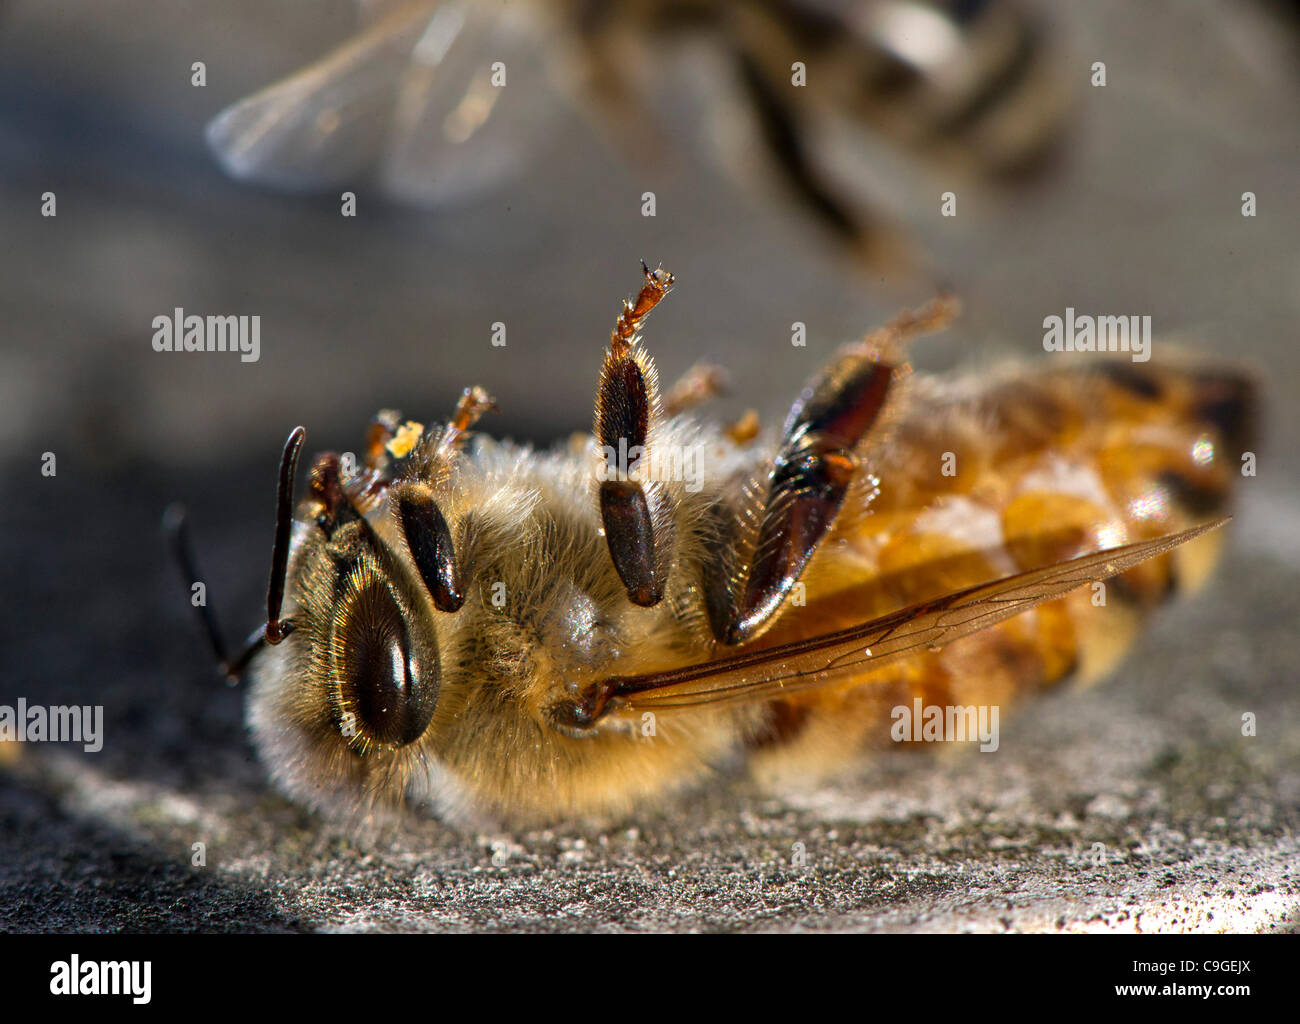 Dec. 23, 2011 - Roseburg, Oregon, U.S - A dead honeybee is seen outside its hive in a orchard on a farm near Roseburg. The cause of death for this bee is not known, but colony collapse disorder continues to be an issue with beehives worldwide. (Credit Image: © Robin Loznak/ZUMAPRESS.com) Stock Photo